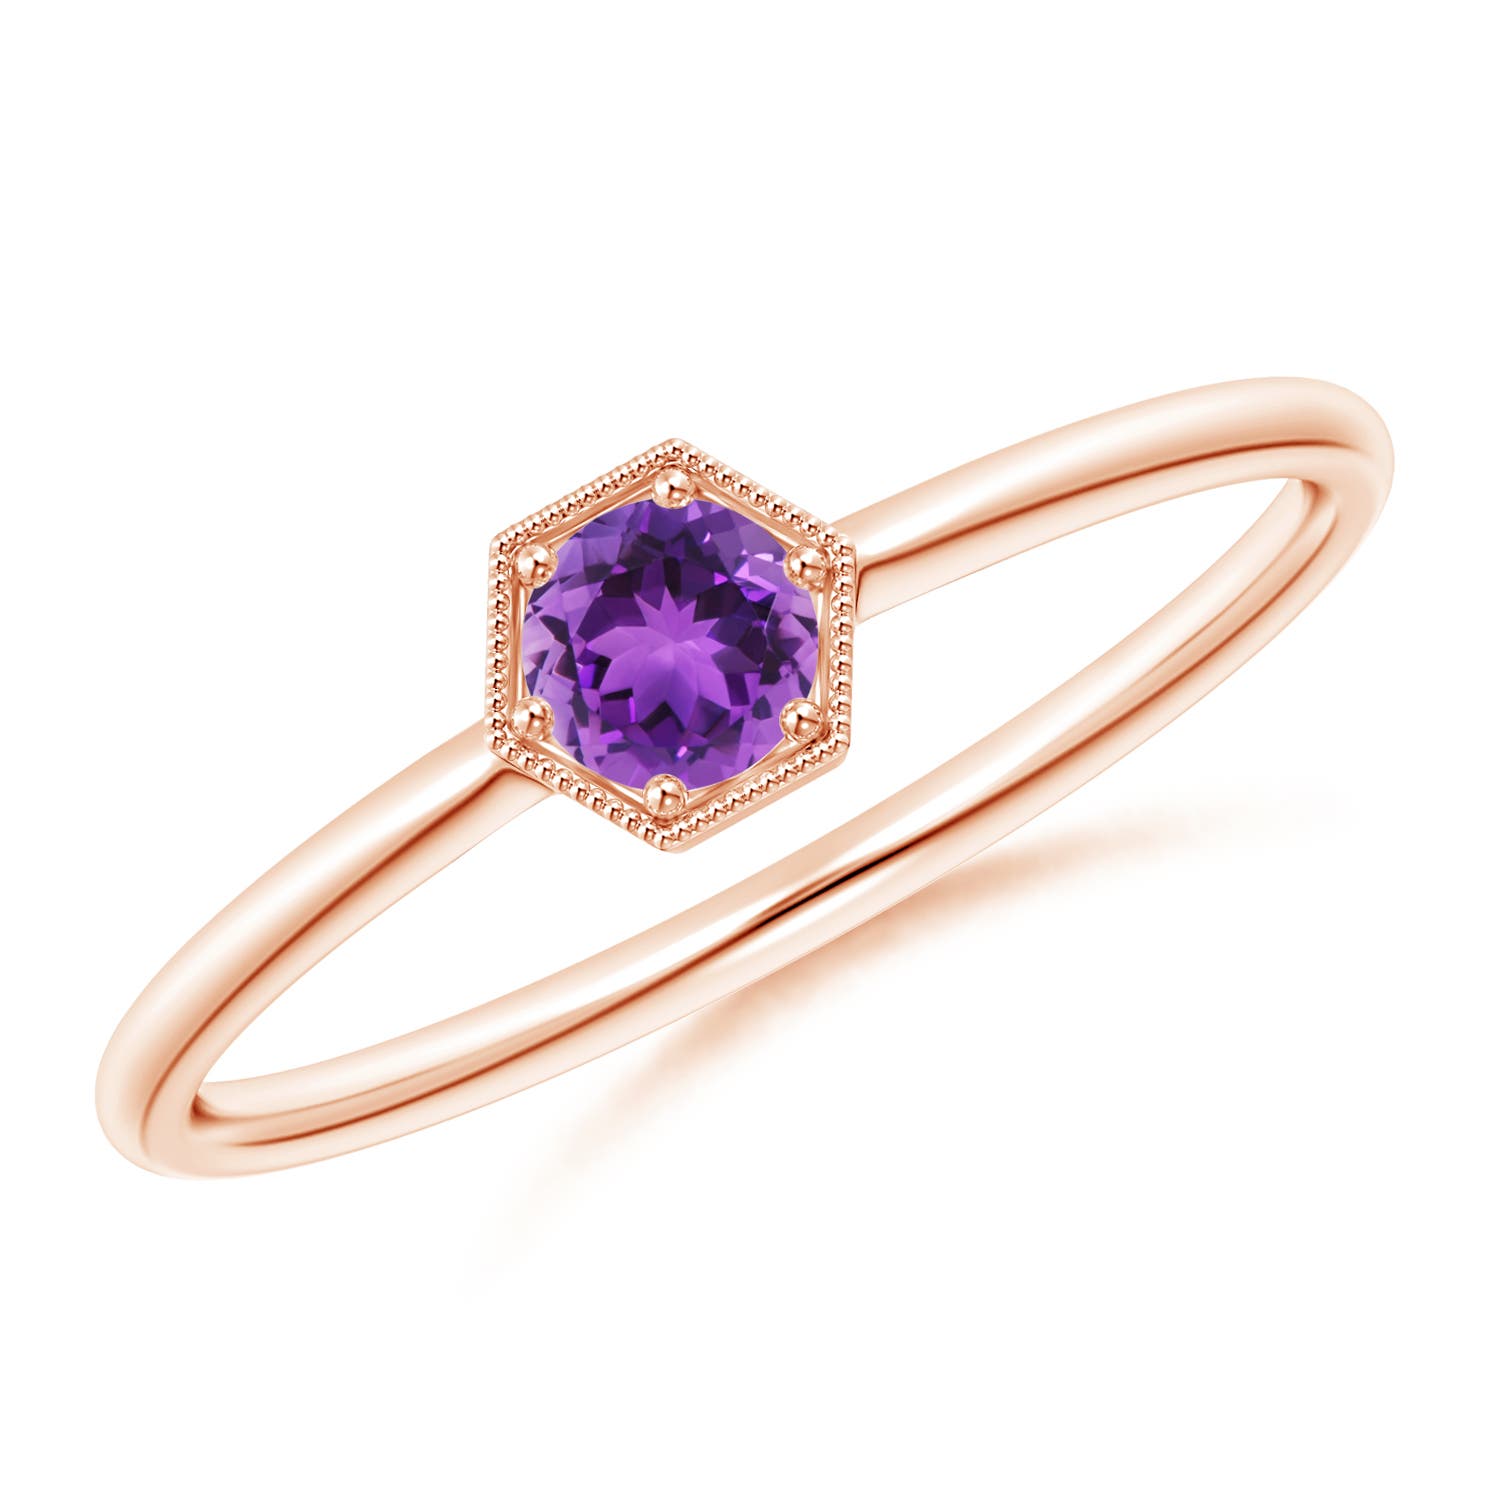 AAA - Amethyst / 0.2 CT / 14 KT Rose Gold